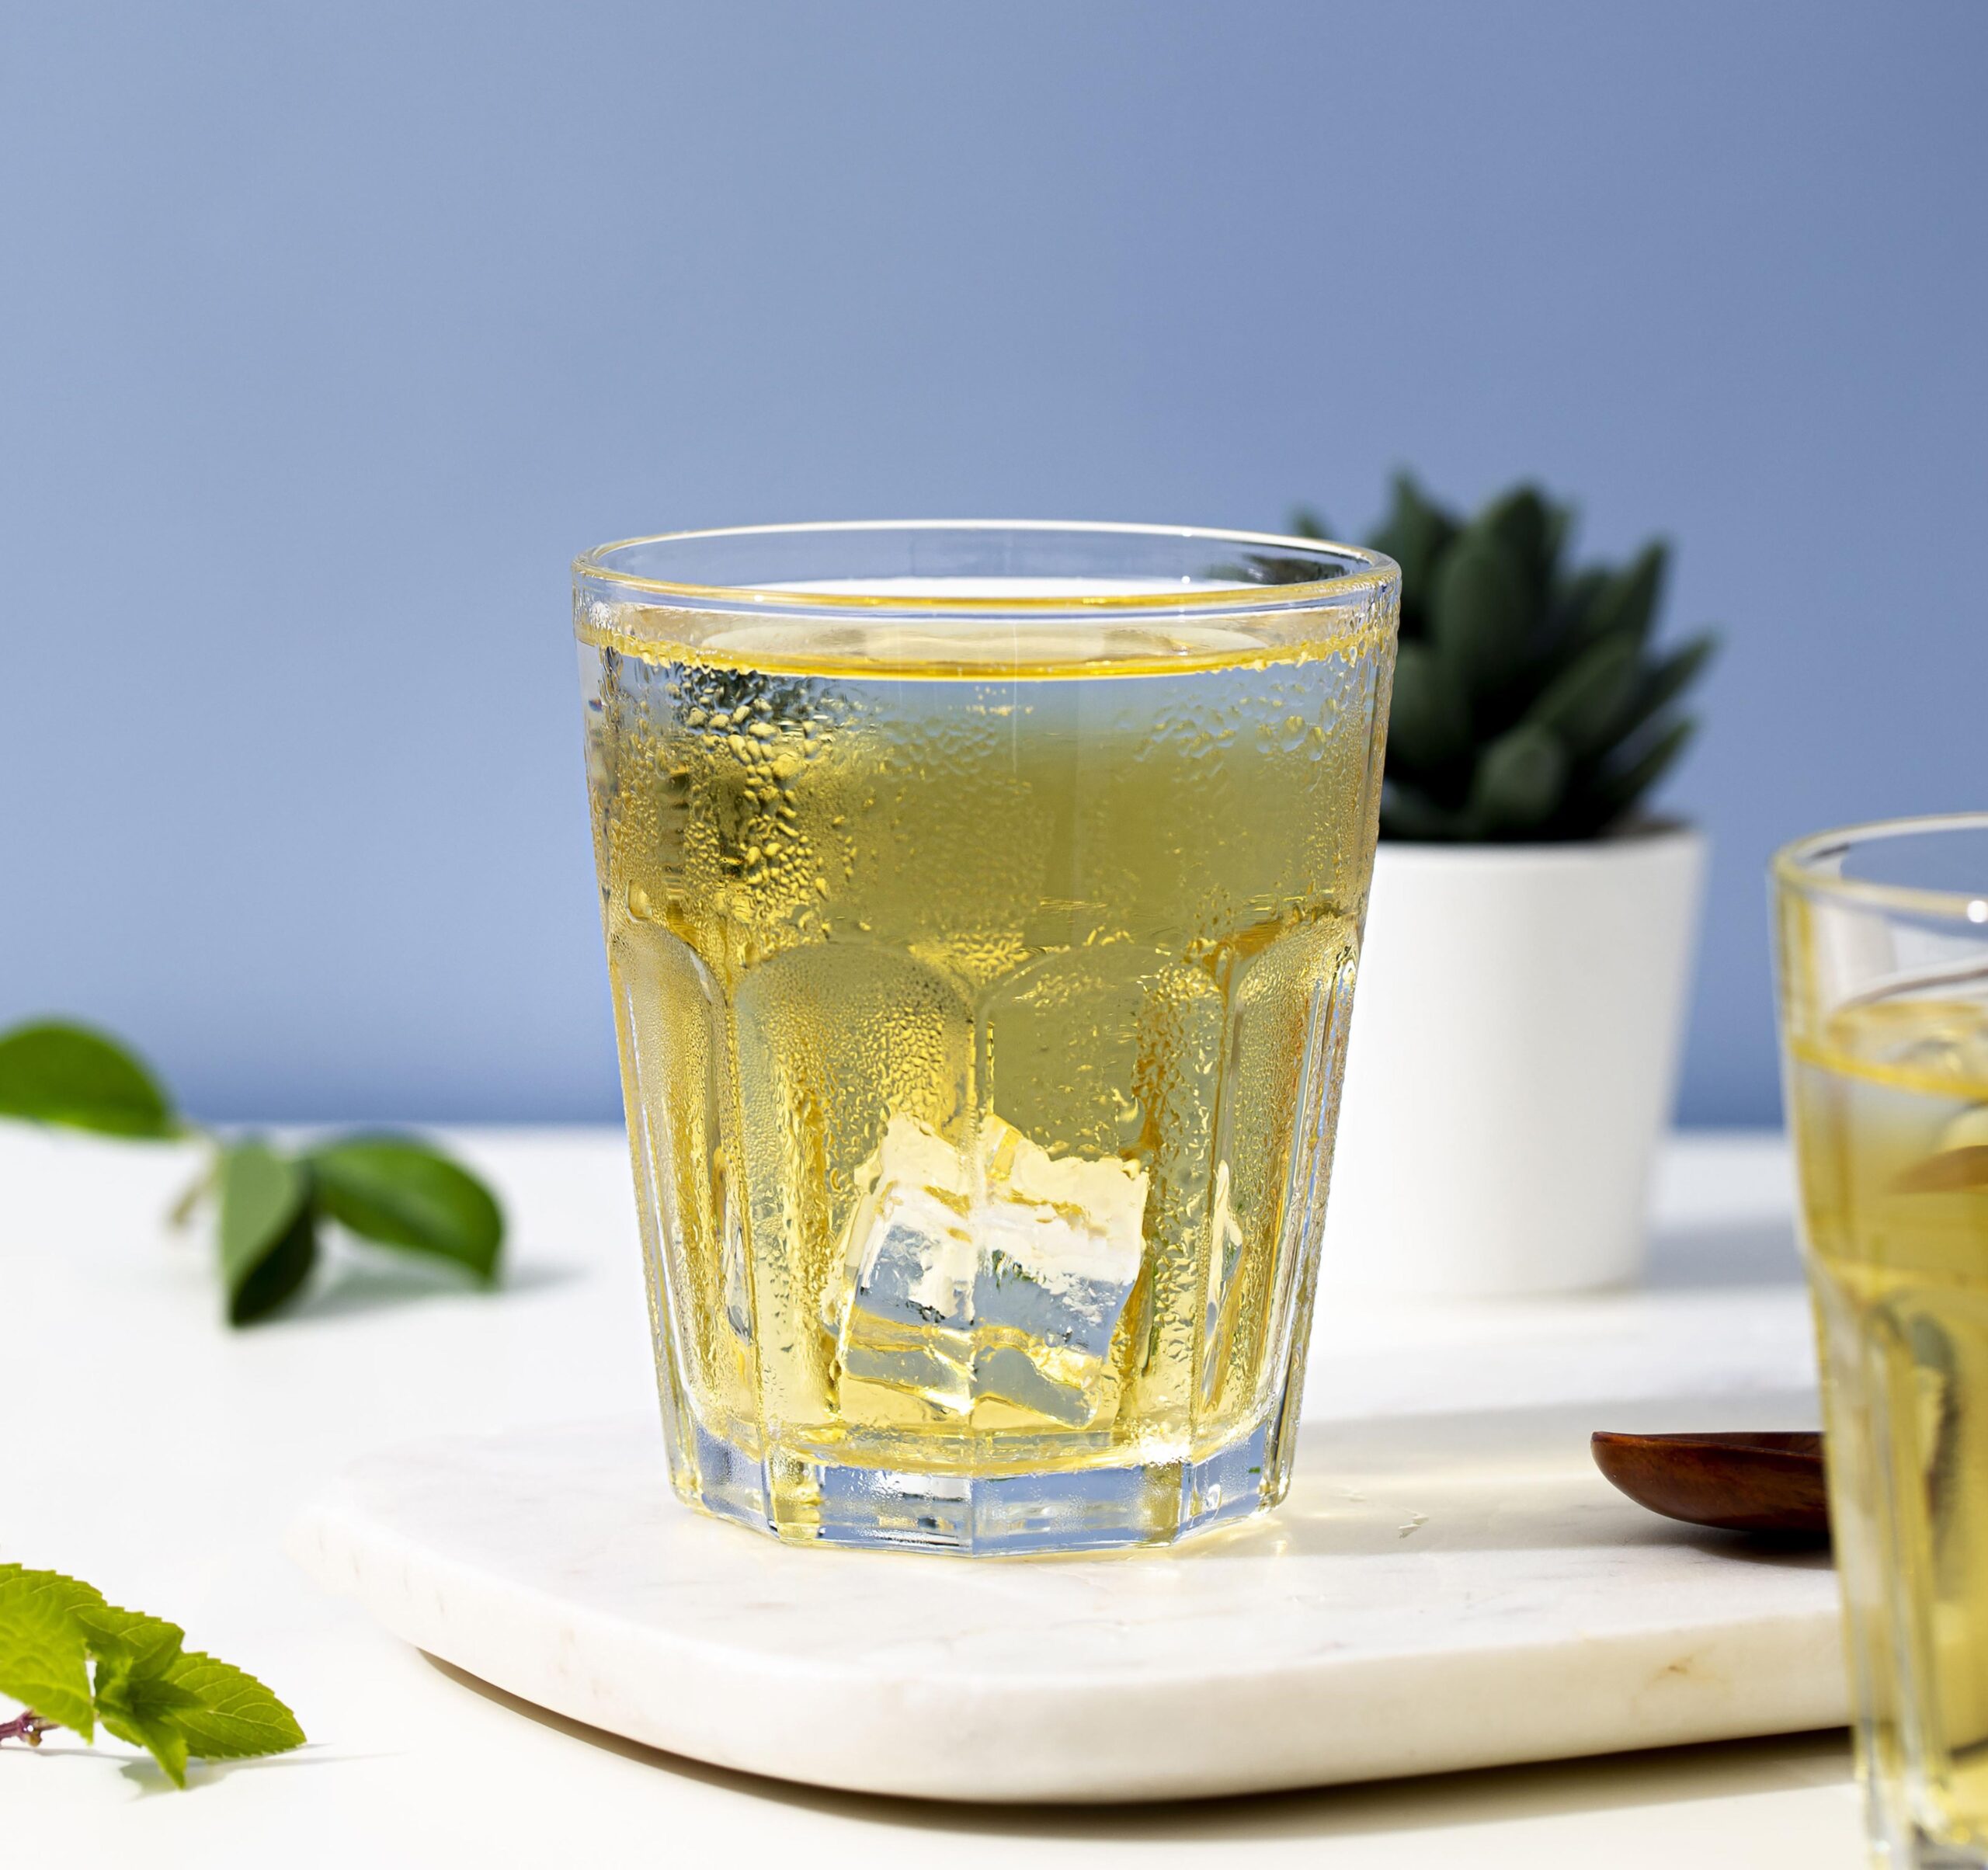 hilled green tea shot in a clear glass, highlighted by natural lighting against a modern backdrop with a succulent plant, exemplifying a refreshing and healthy beverage option for green tea enthusiasts and health-conscious individuals.